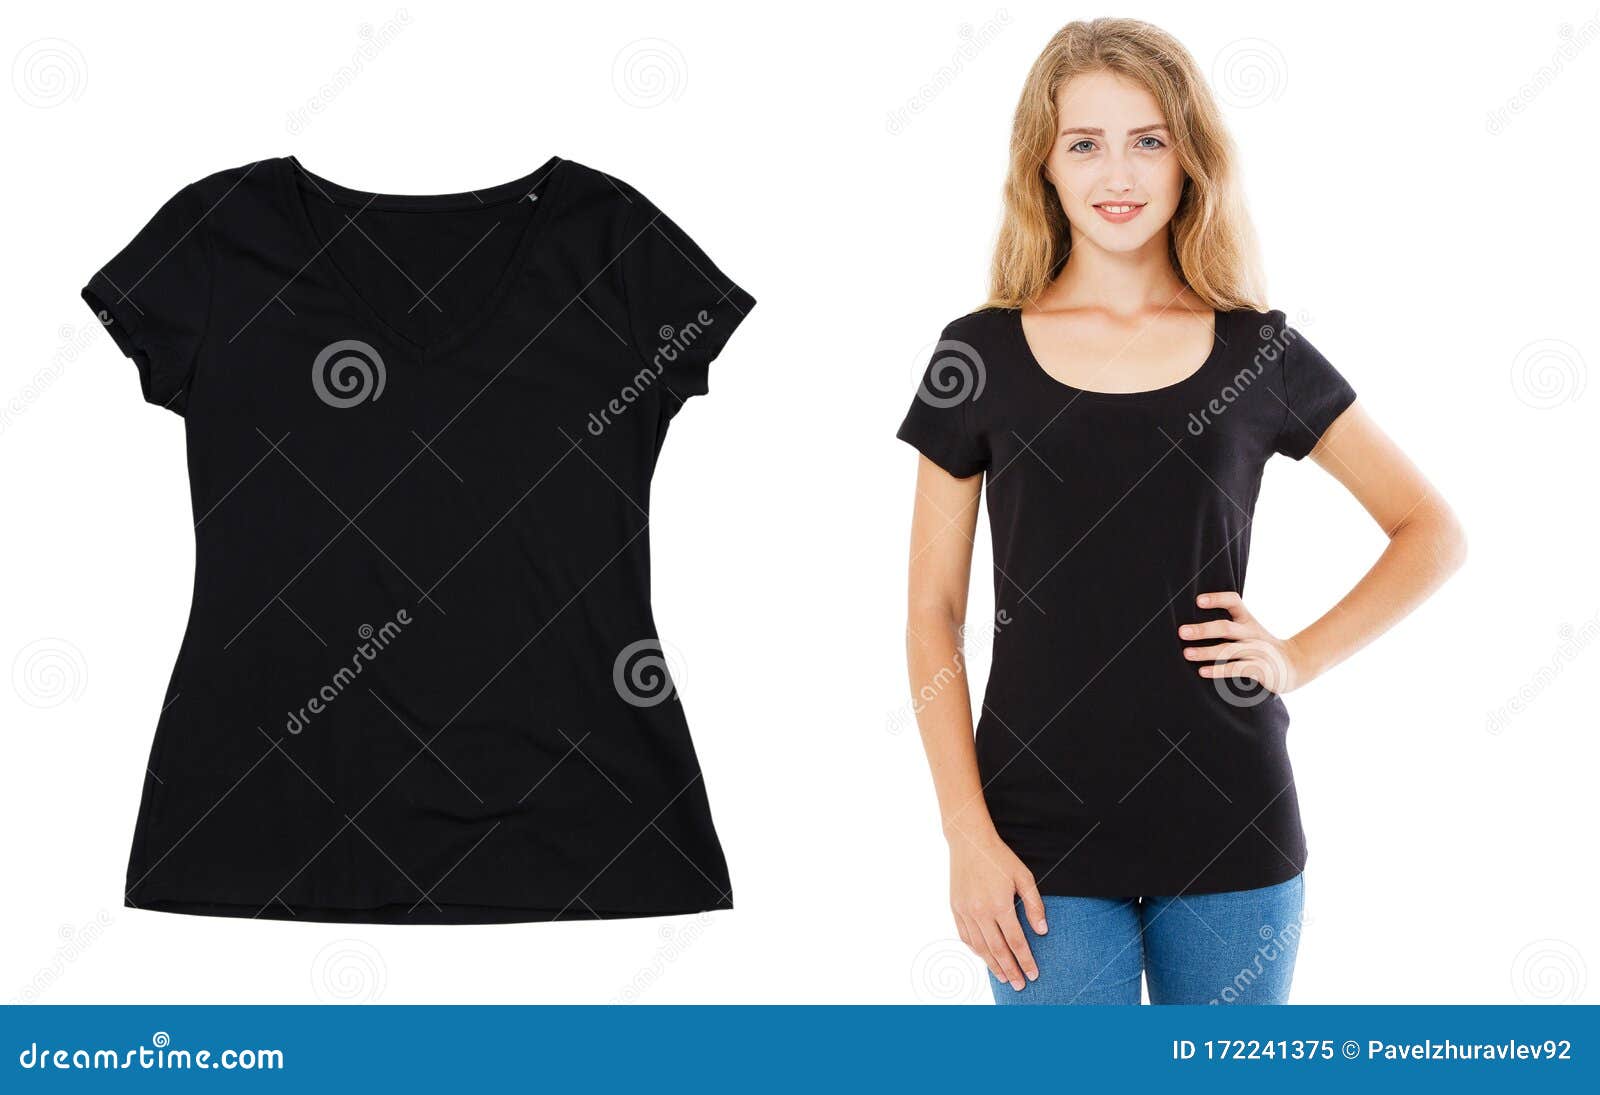 Download Black T Shirt Mockup Close Up Over White, Girl In T Shirt ...